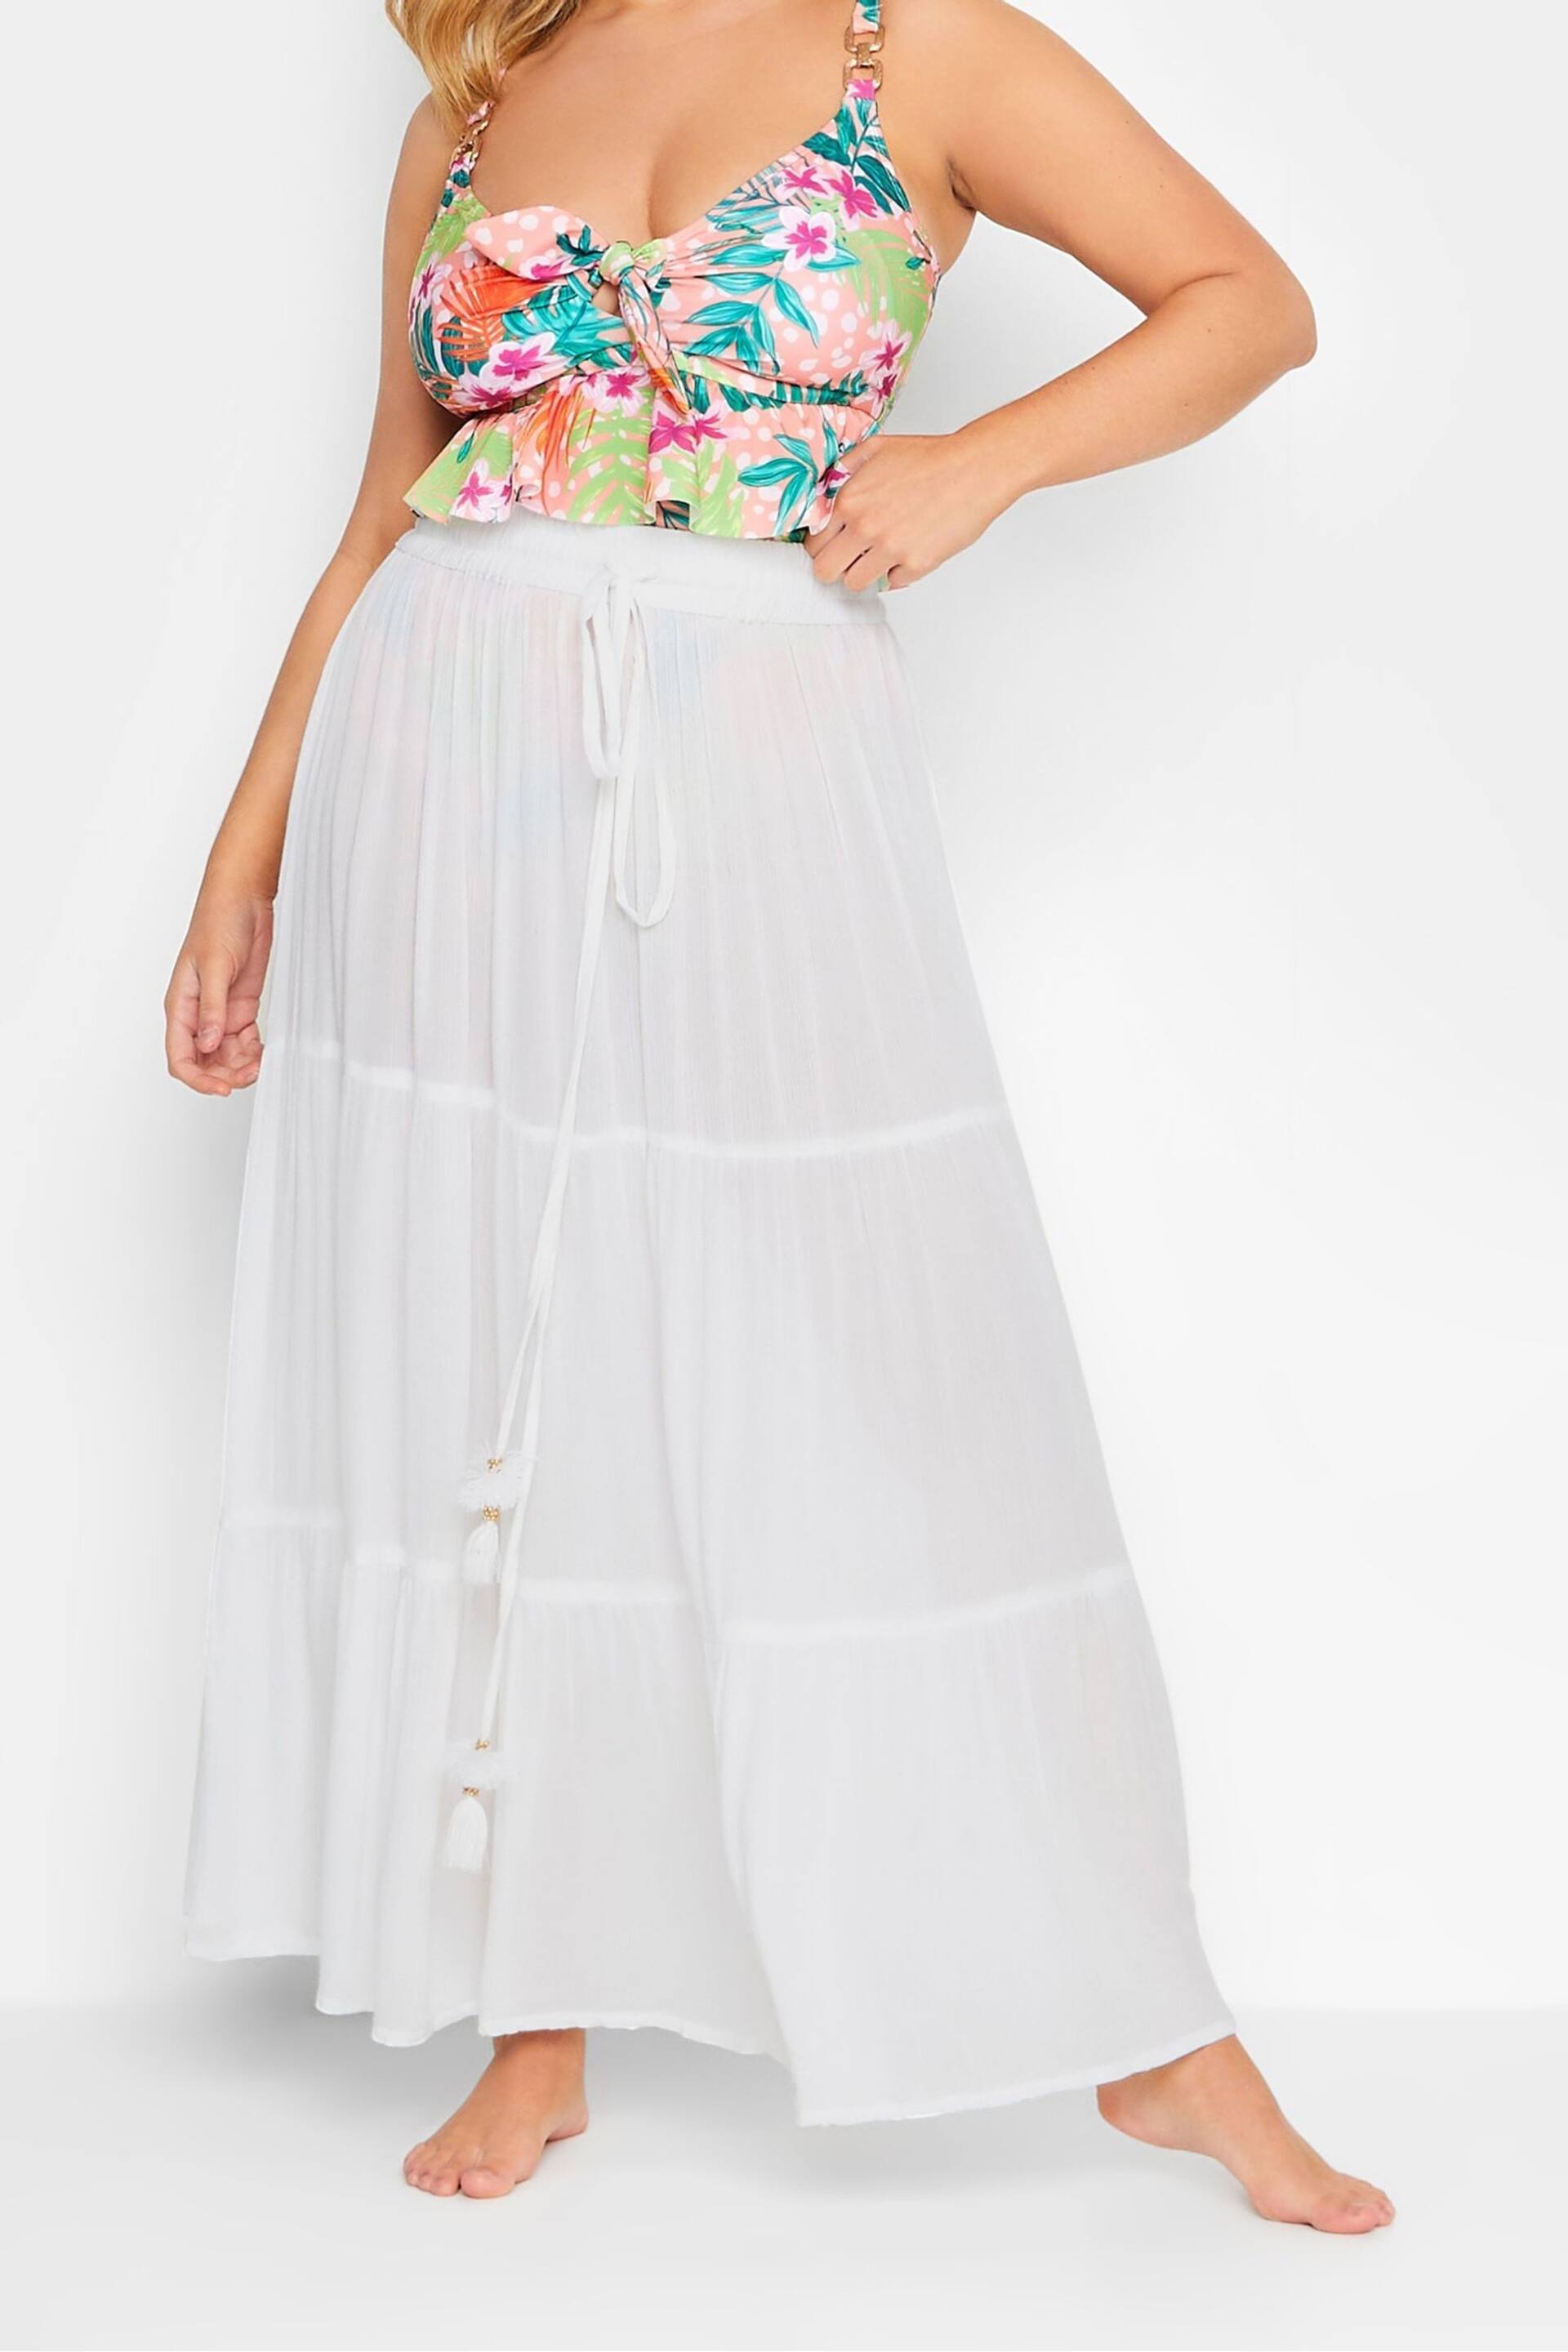 Yours Curve White Beach Skirt - Image 2 of 4